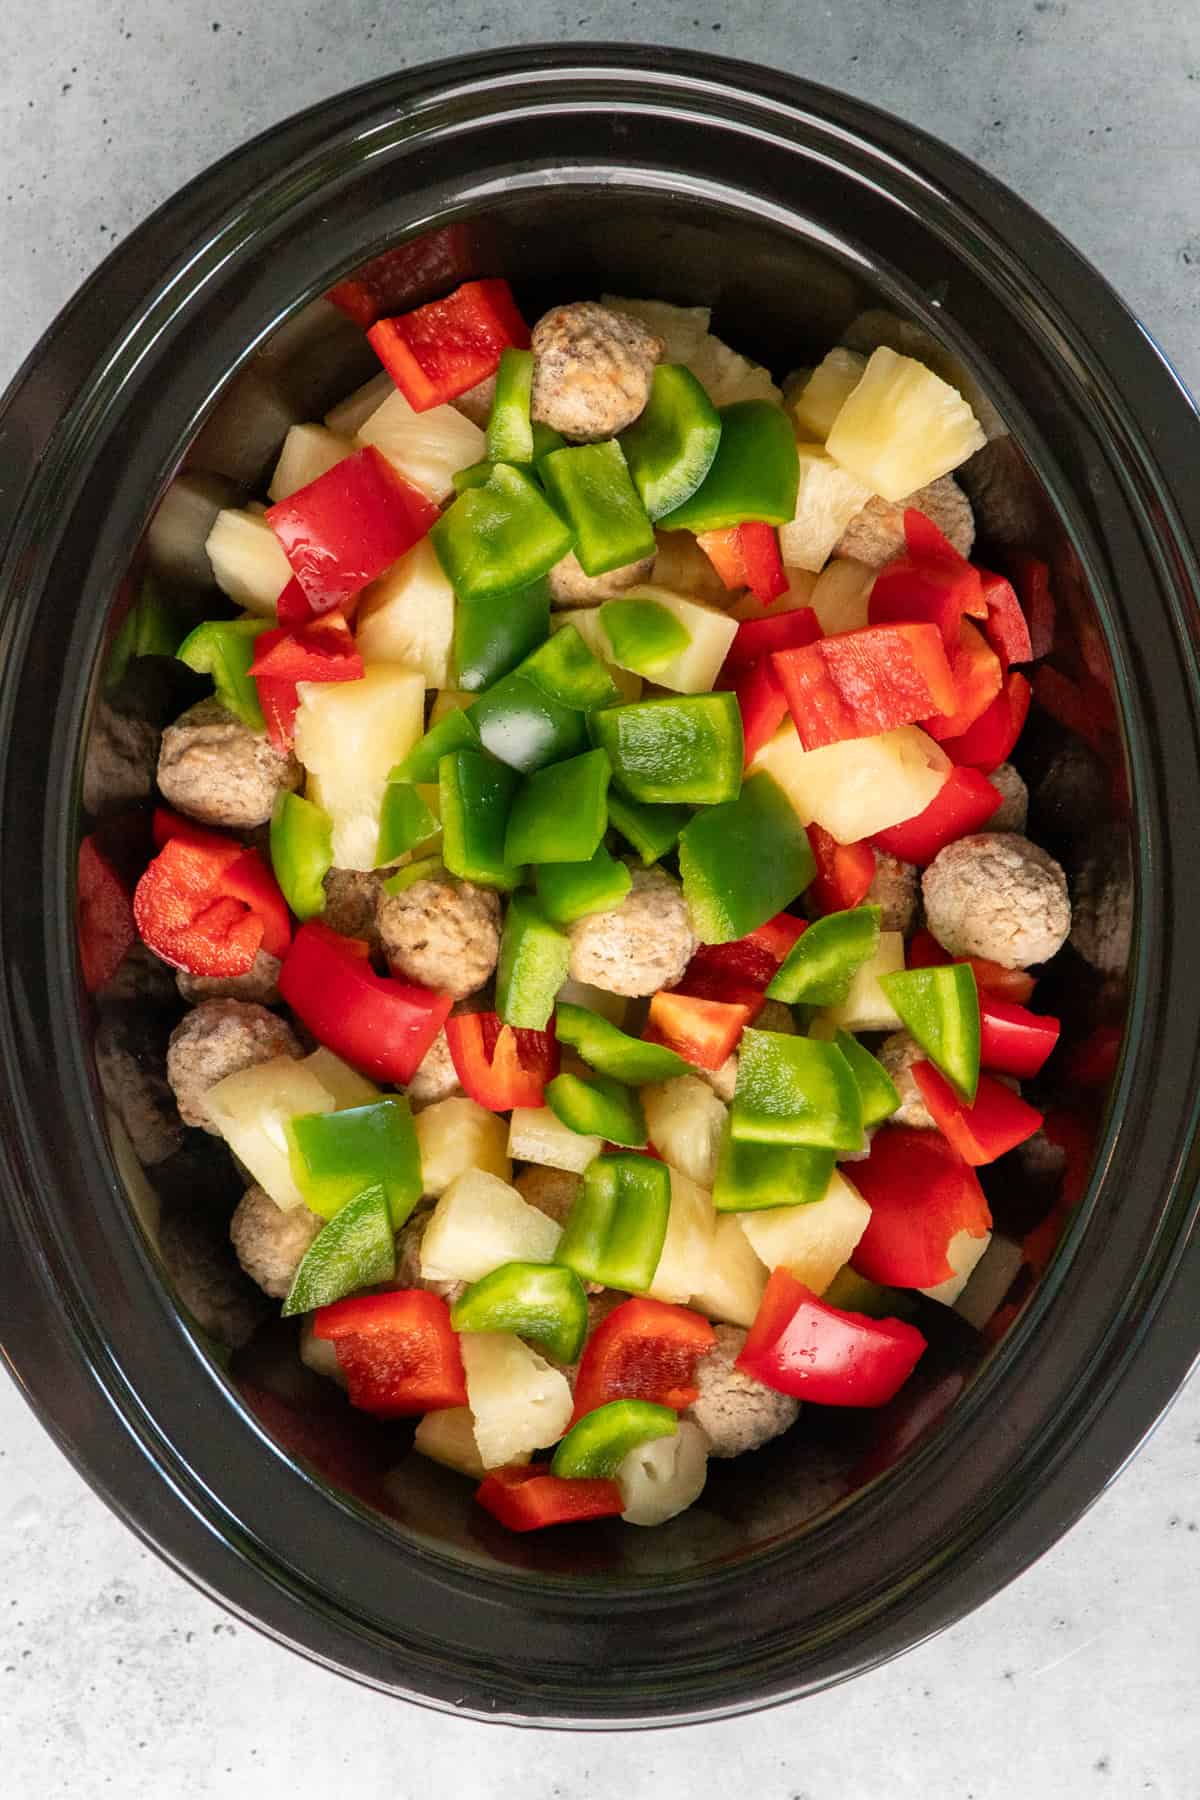 Overhead look at meatballs pineapple, bell peppers in a bowl.